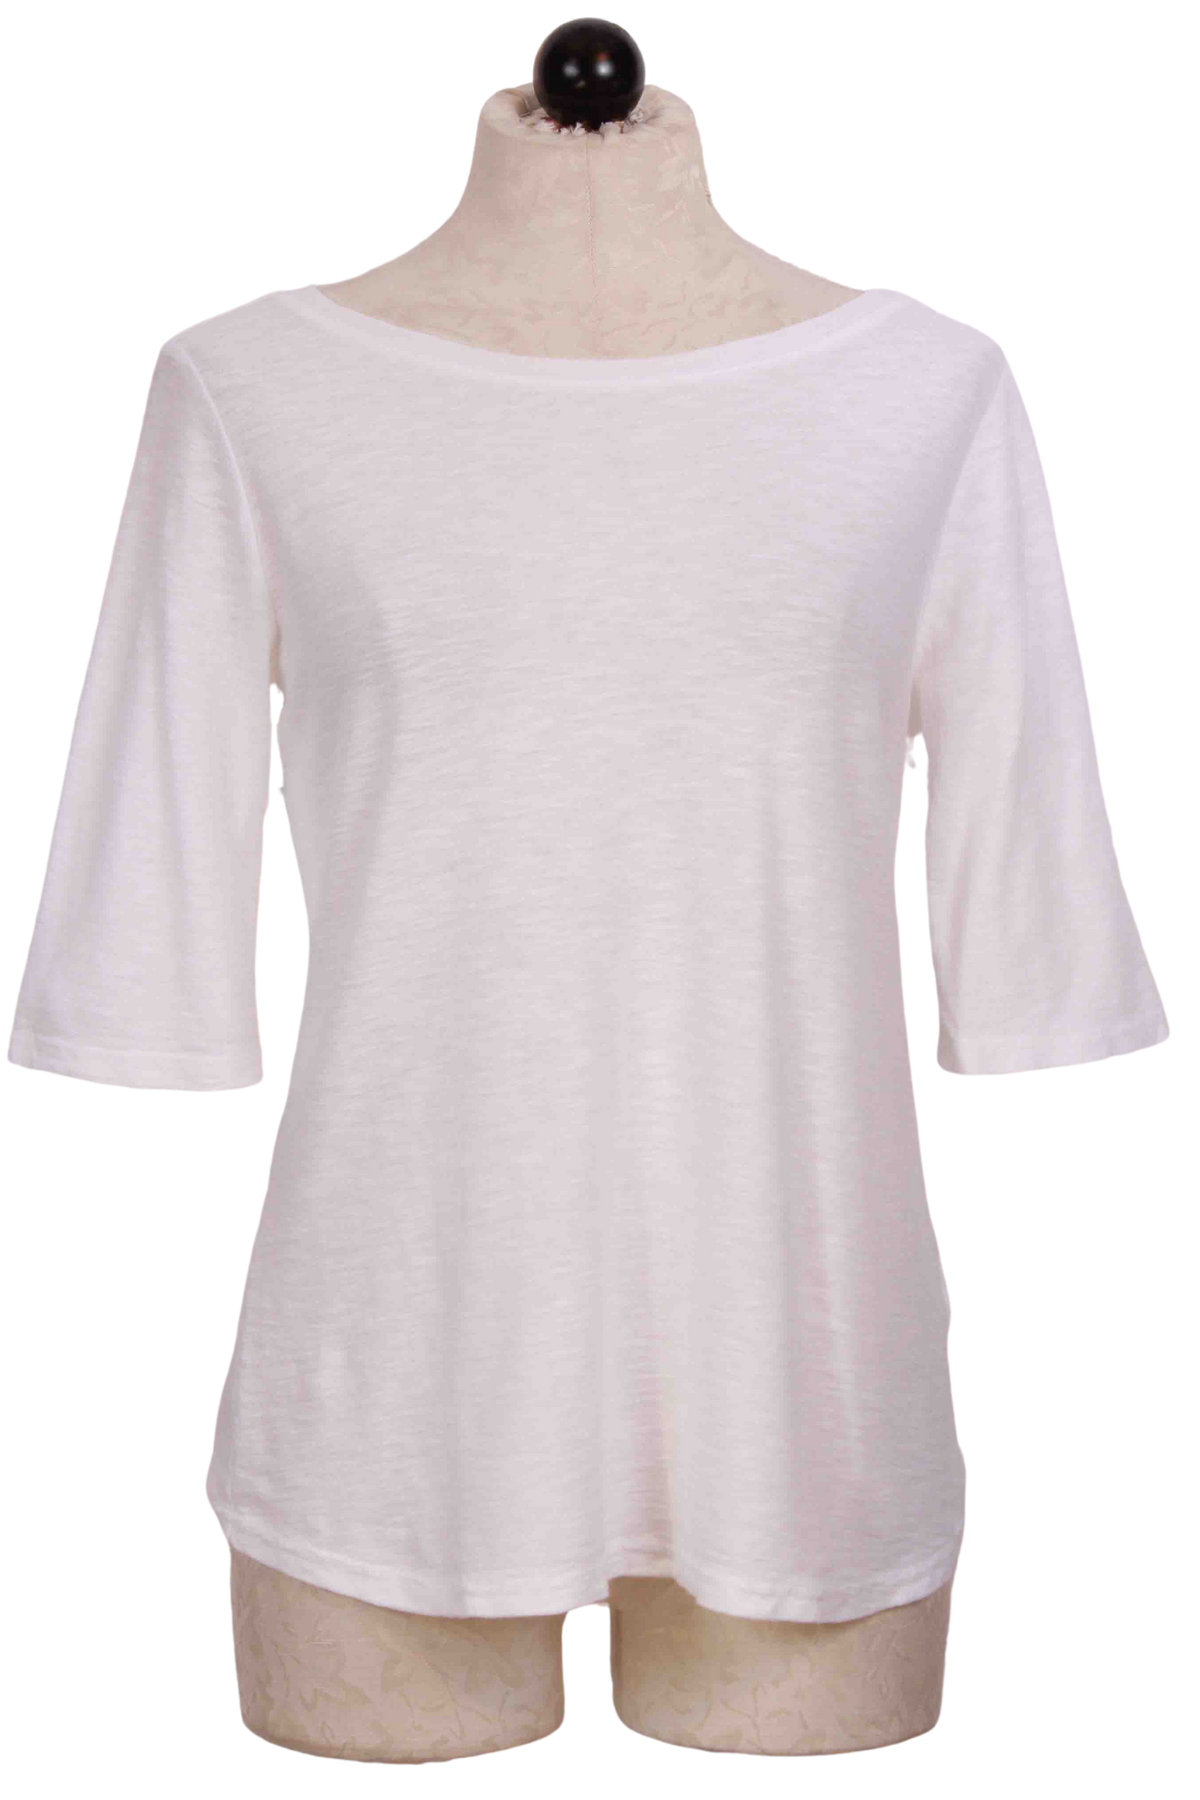 White Elbow Tee by Cut Loose